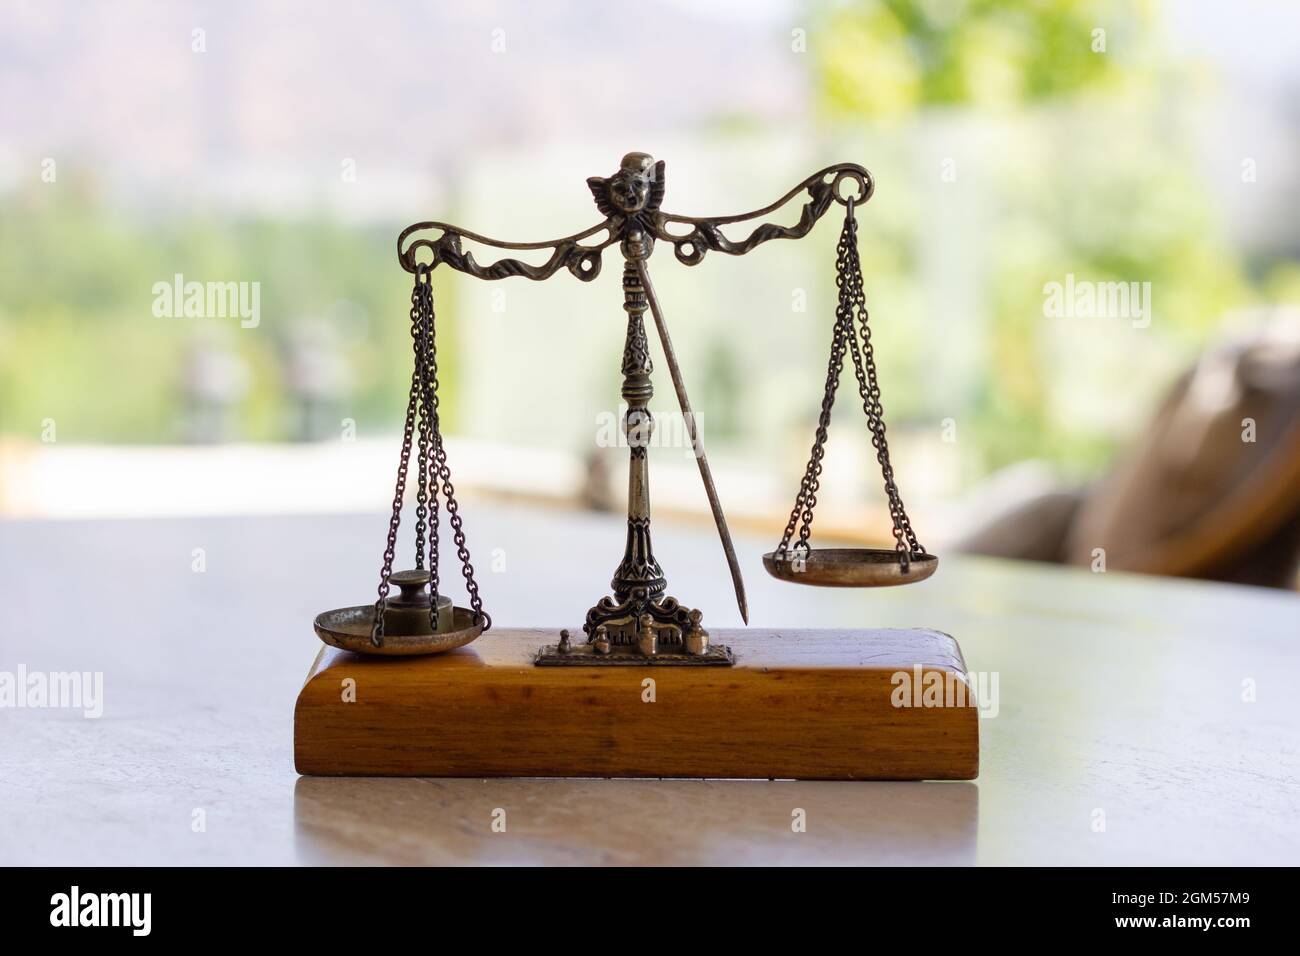 Imbalanced weighing scale miniature with weight on left plate. Weigh instrument, law, justice concepts Stock Photo